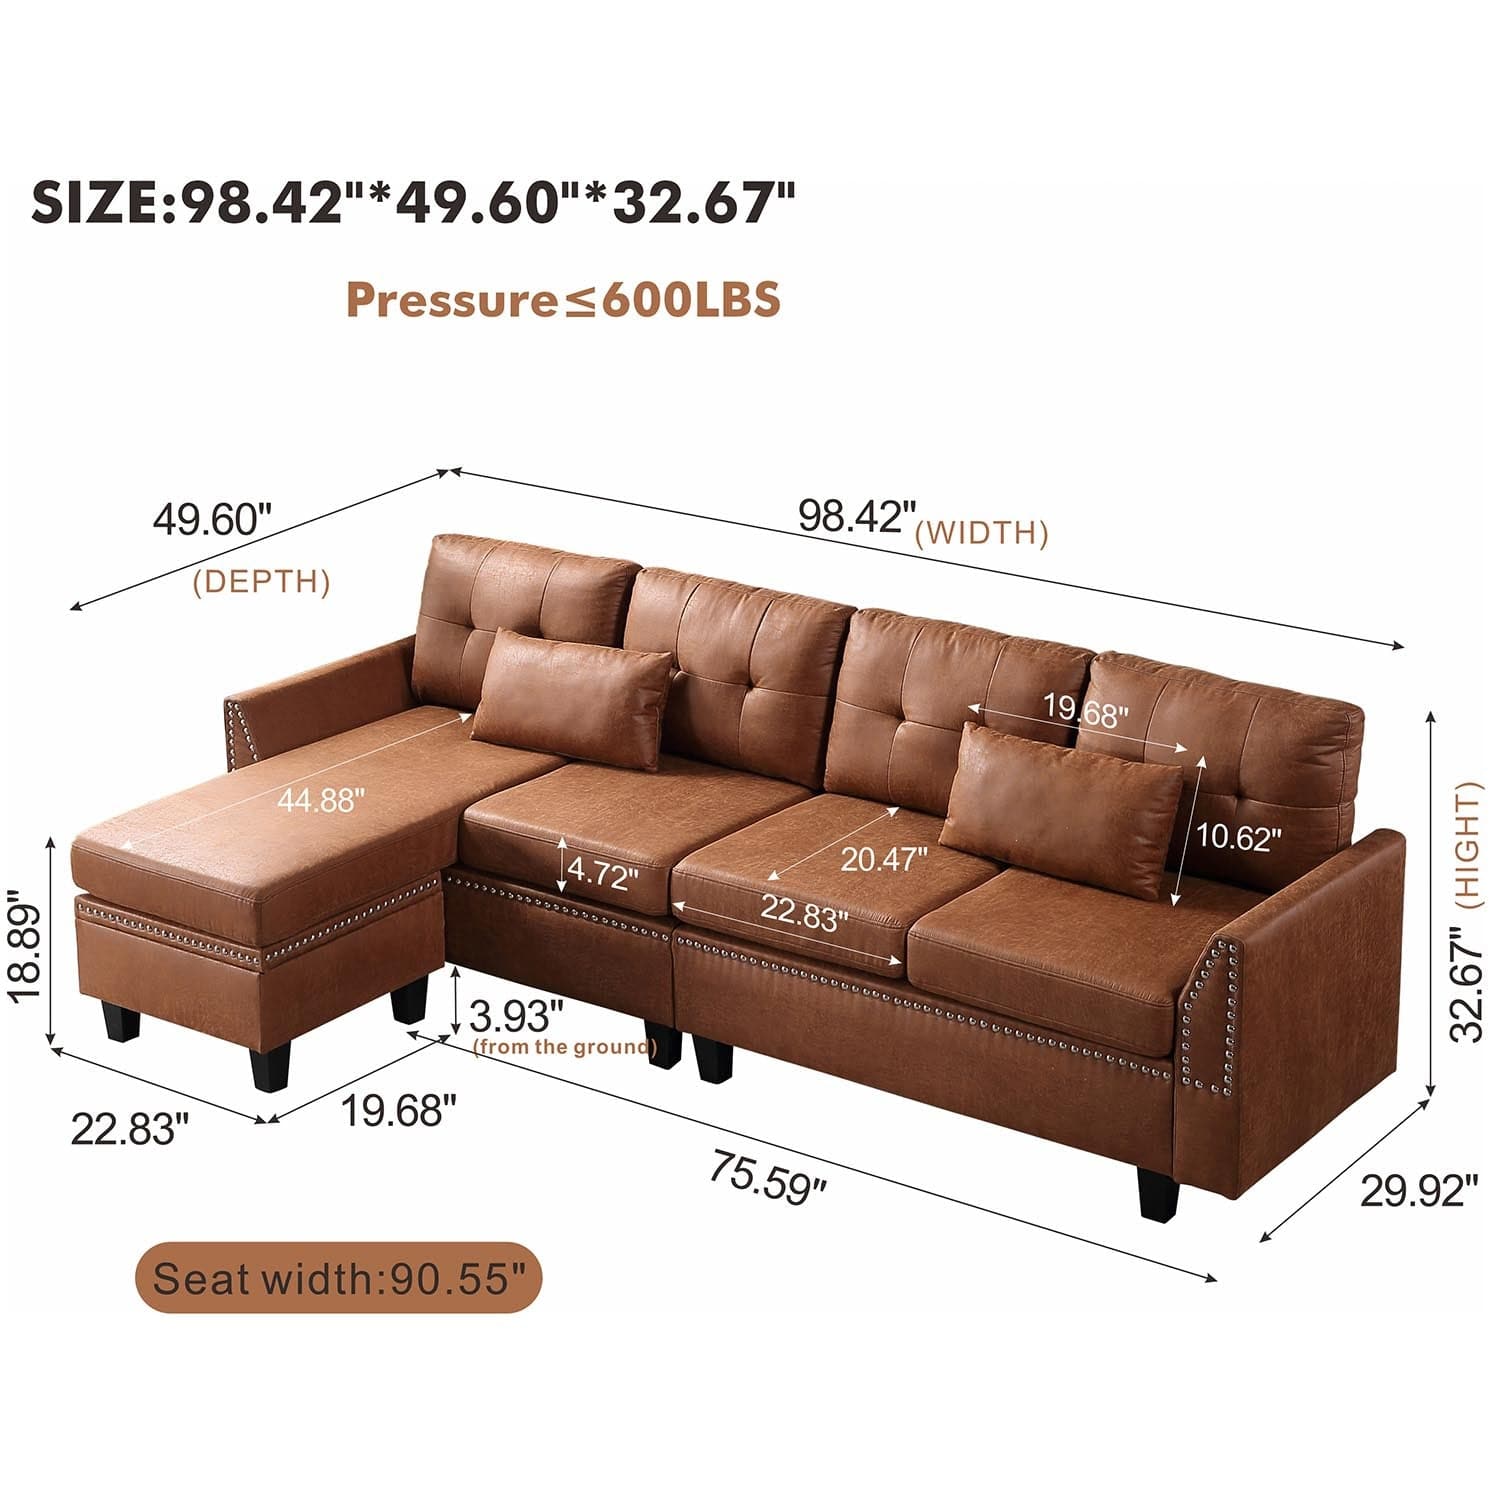 Ovios Living Room 98.42" Wide Flared Arm Suede Fabric or Leathair L Shaped Sofa with Ottoman-Light Brown